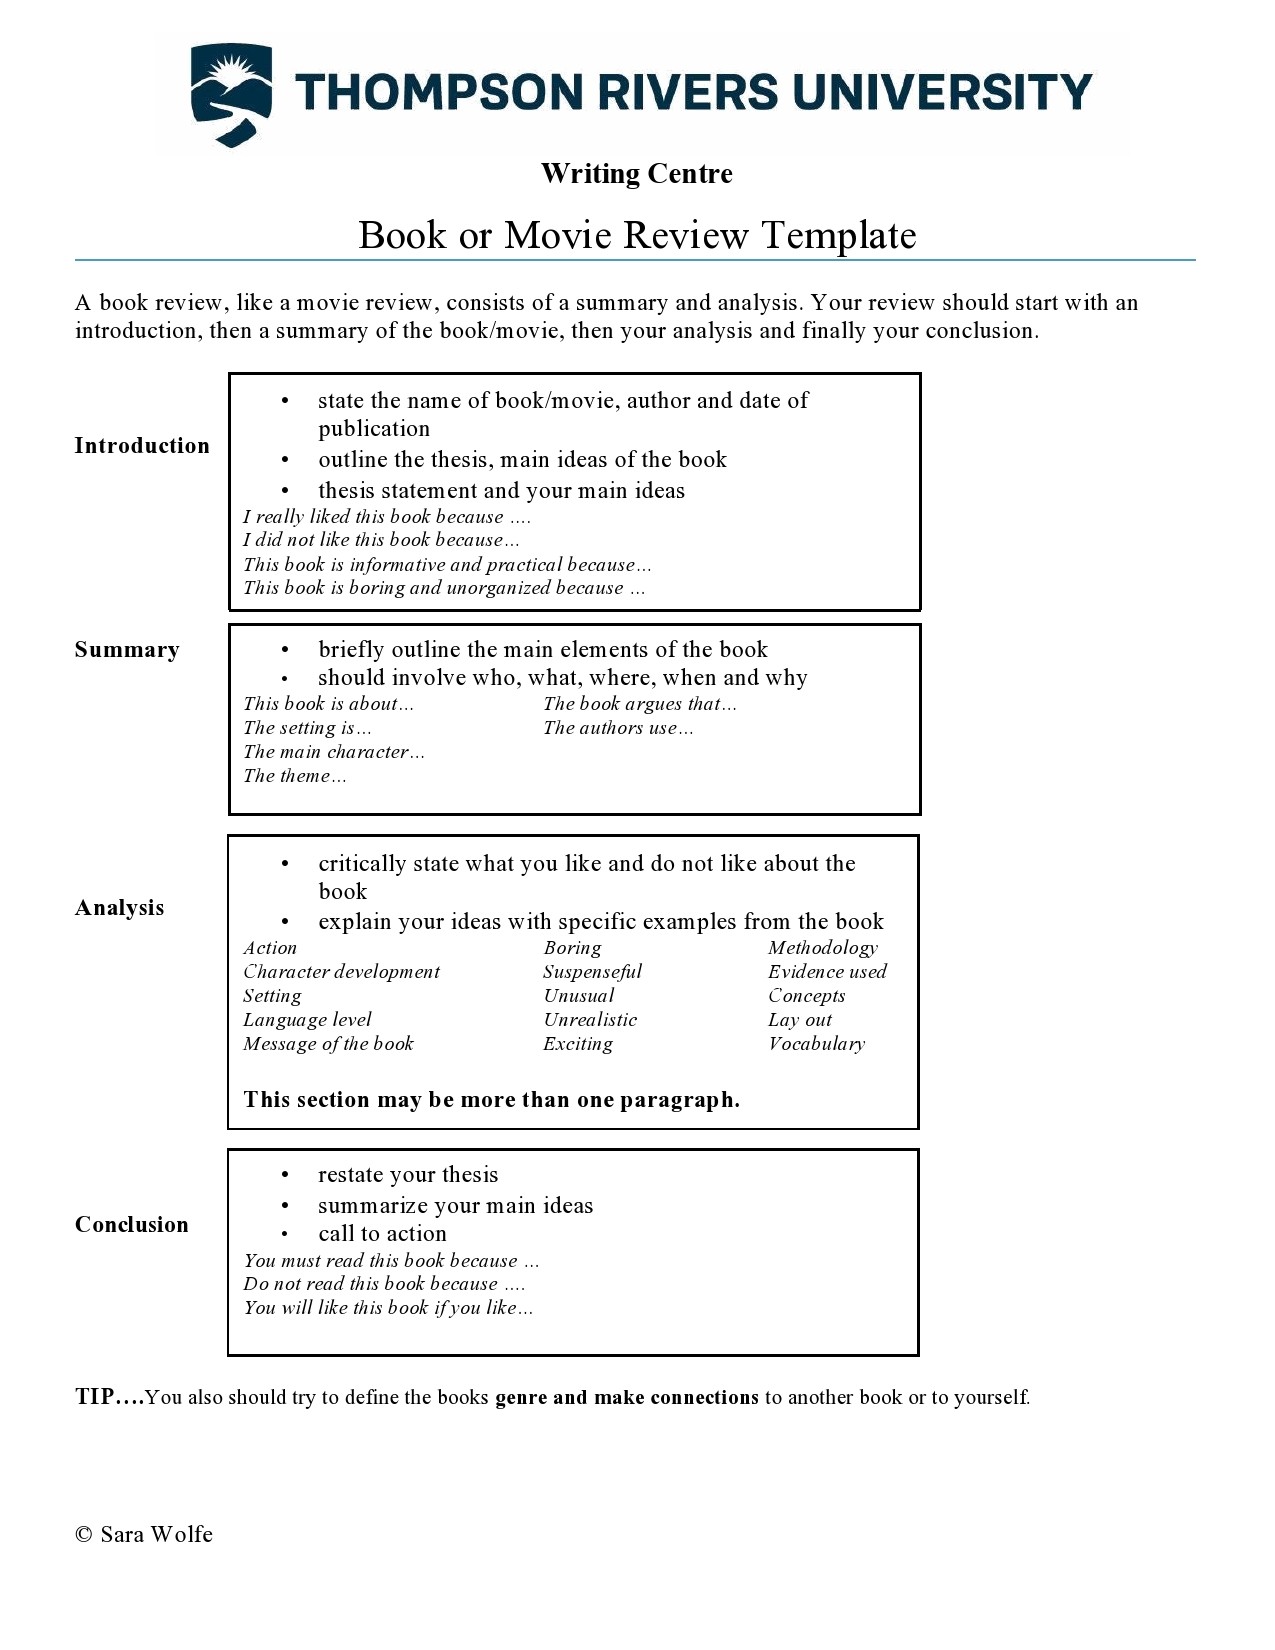 Free book review template 02